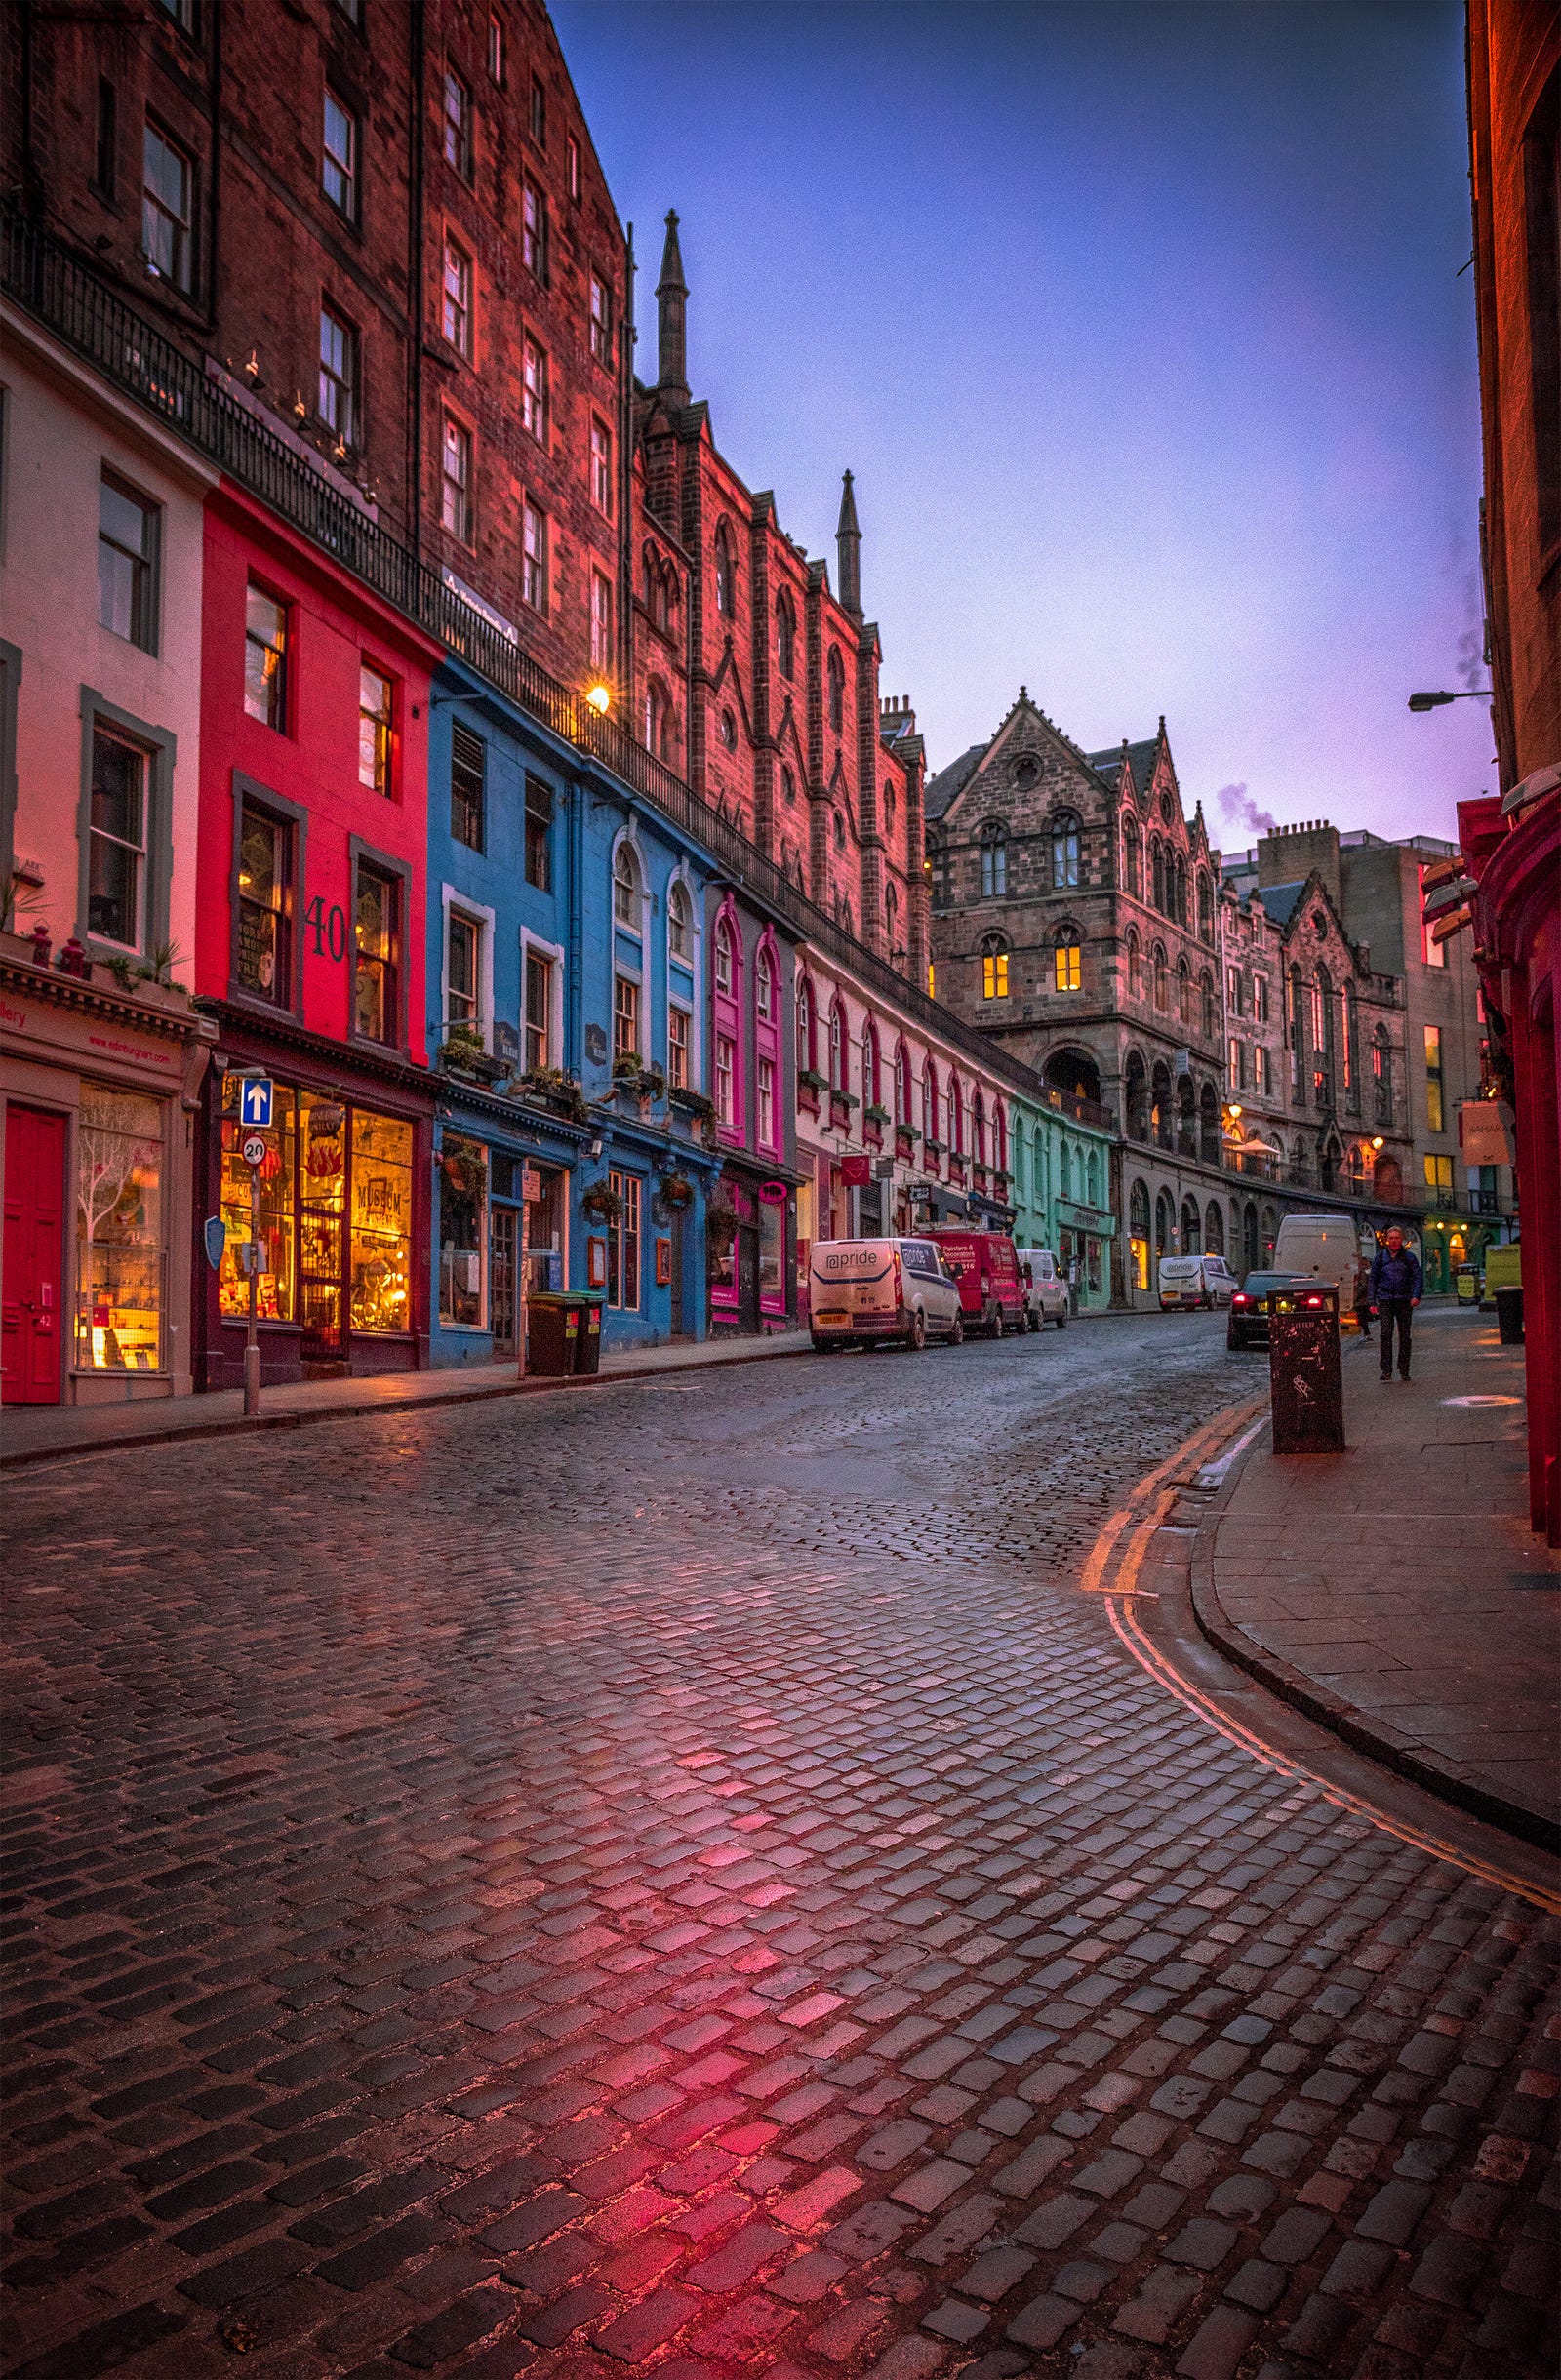 A photo of colorful buildings (and wet pavement) lining a slope in Edinburgh, Scotland. By walking uphill, you engage more muscles, particularly in your lower body, and increase the intensity of your walk. This activity helps build strength and endurance.